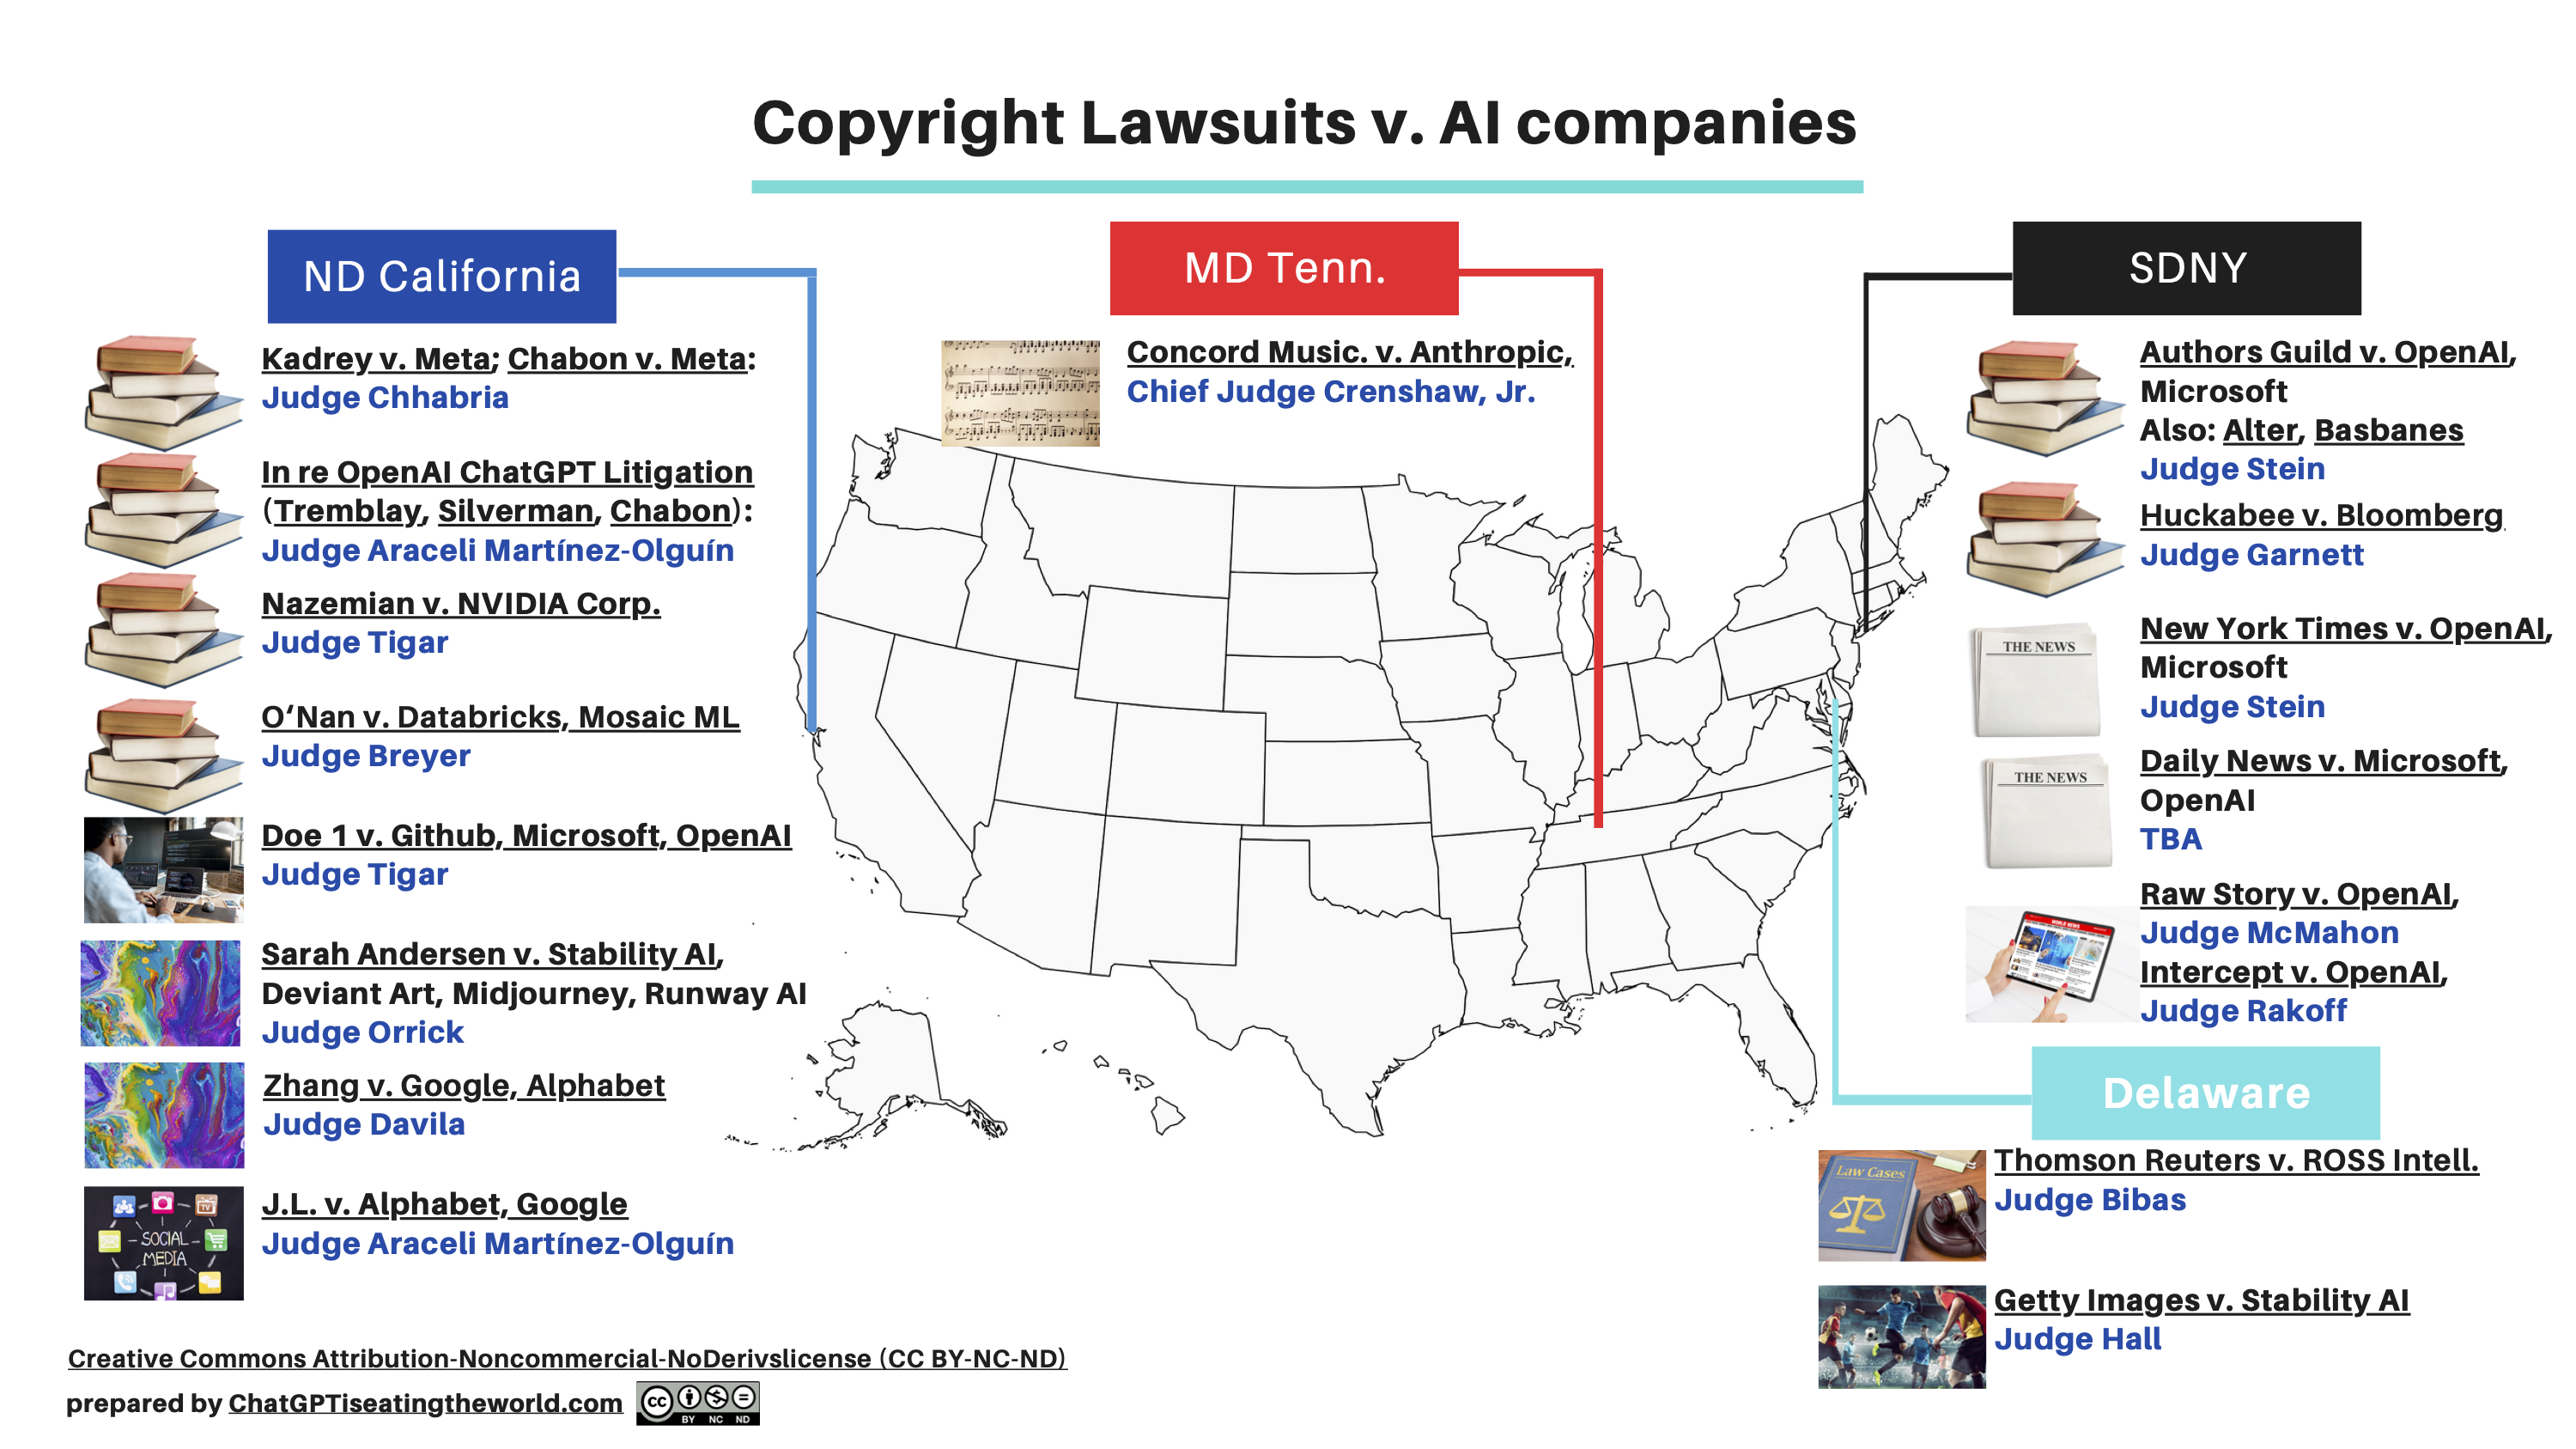 Updated Map of copyright cases v. AI companies in U.S.